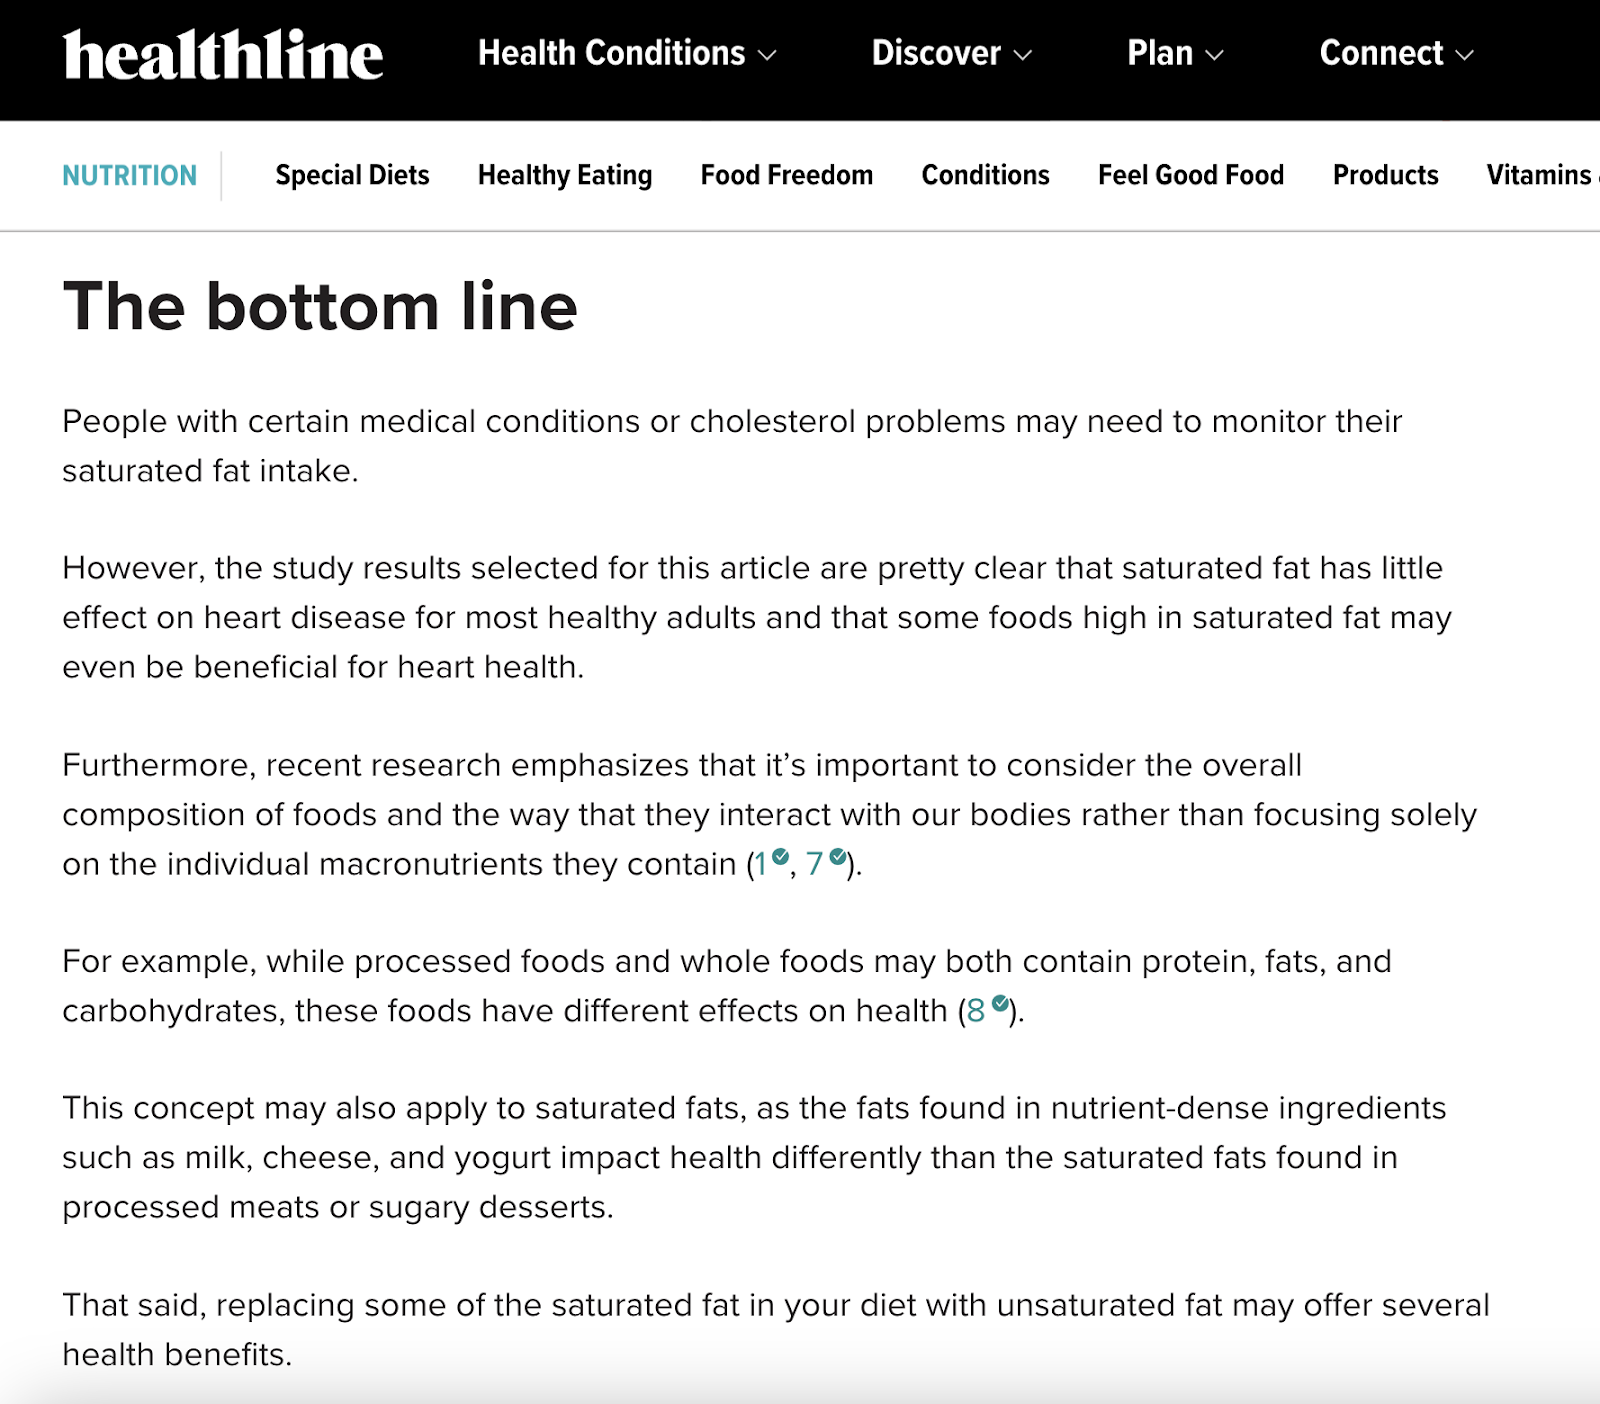 Healthline's article conclusion goes into more detail on the effect of saturated fat, referencing the studies presented in the article